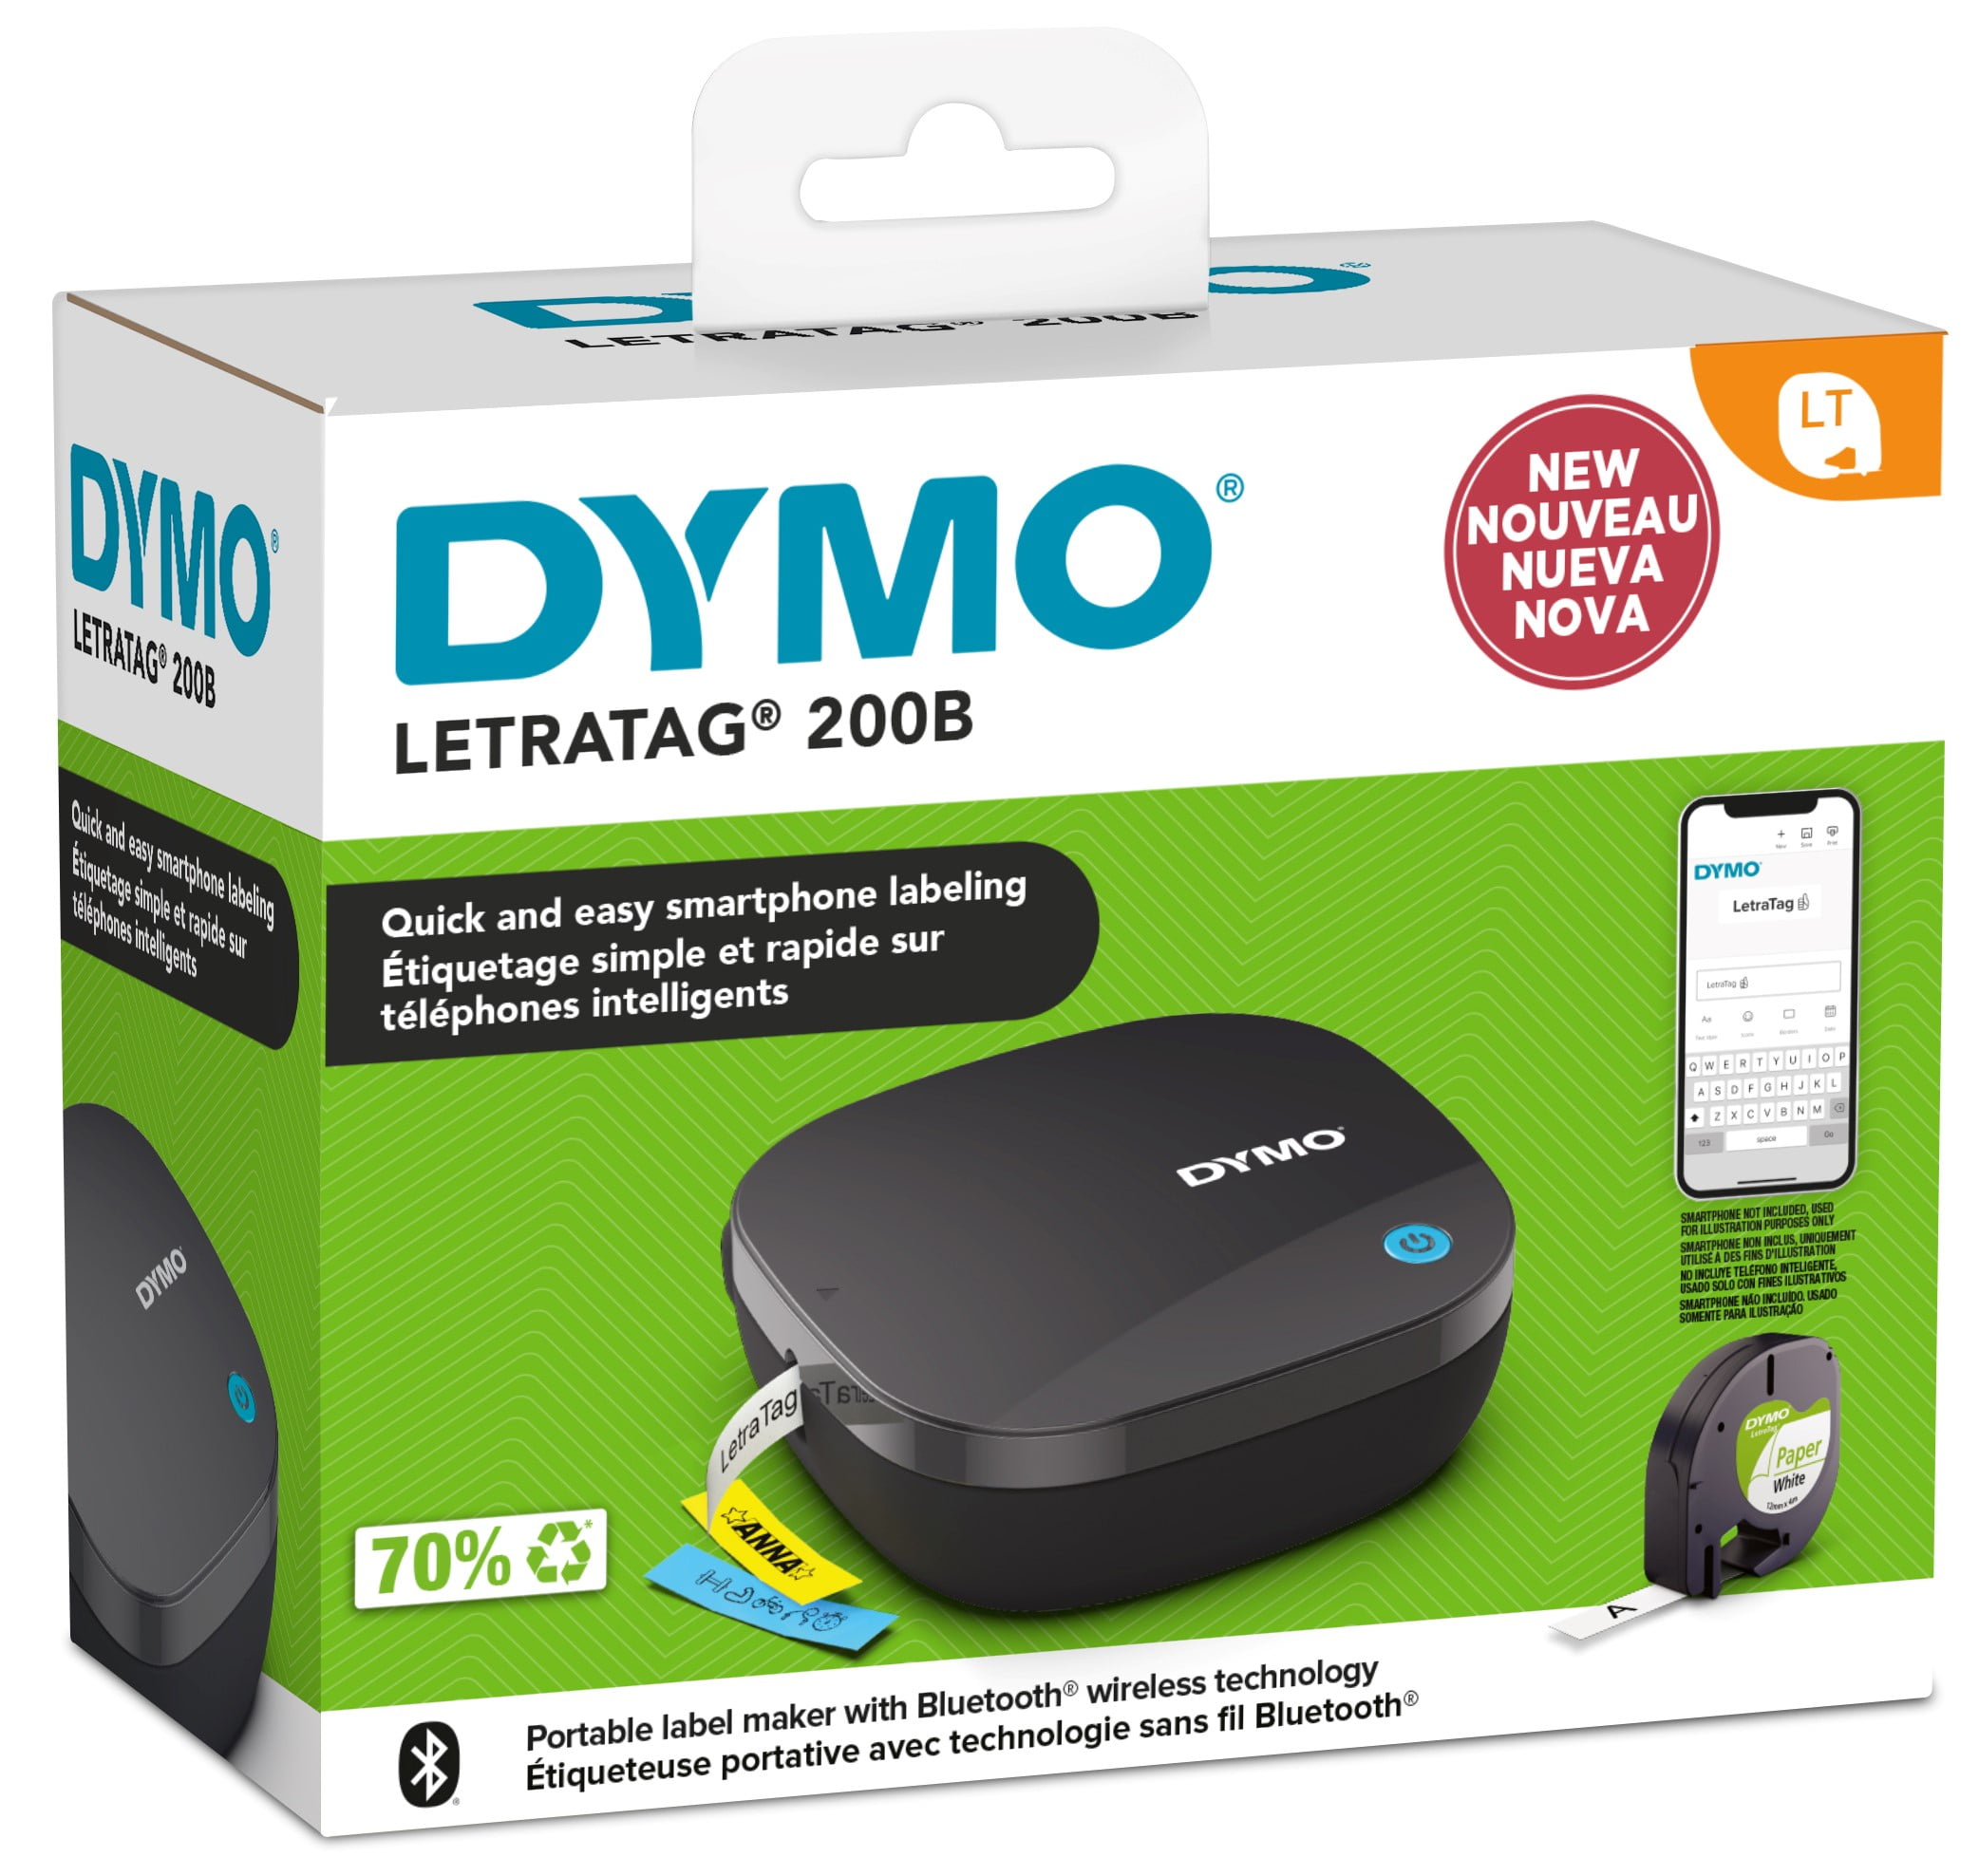 DYMO Label Maker , LabelManager 280 Rechargeable Portable Label Maker, Easy -to-Use, One-Touch Smart Keys, QWERTY Keyboard, PC and Mac Connectivity, for  Home & Office Organization LabelManager 280 Maker 